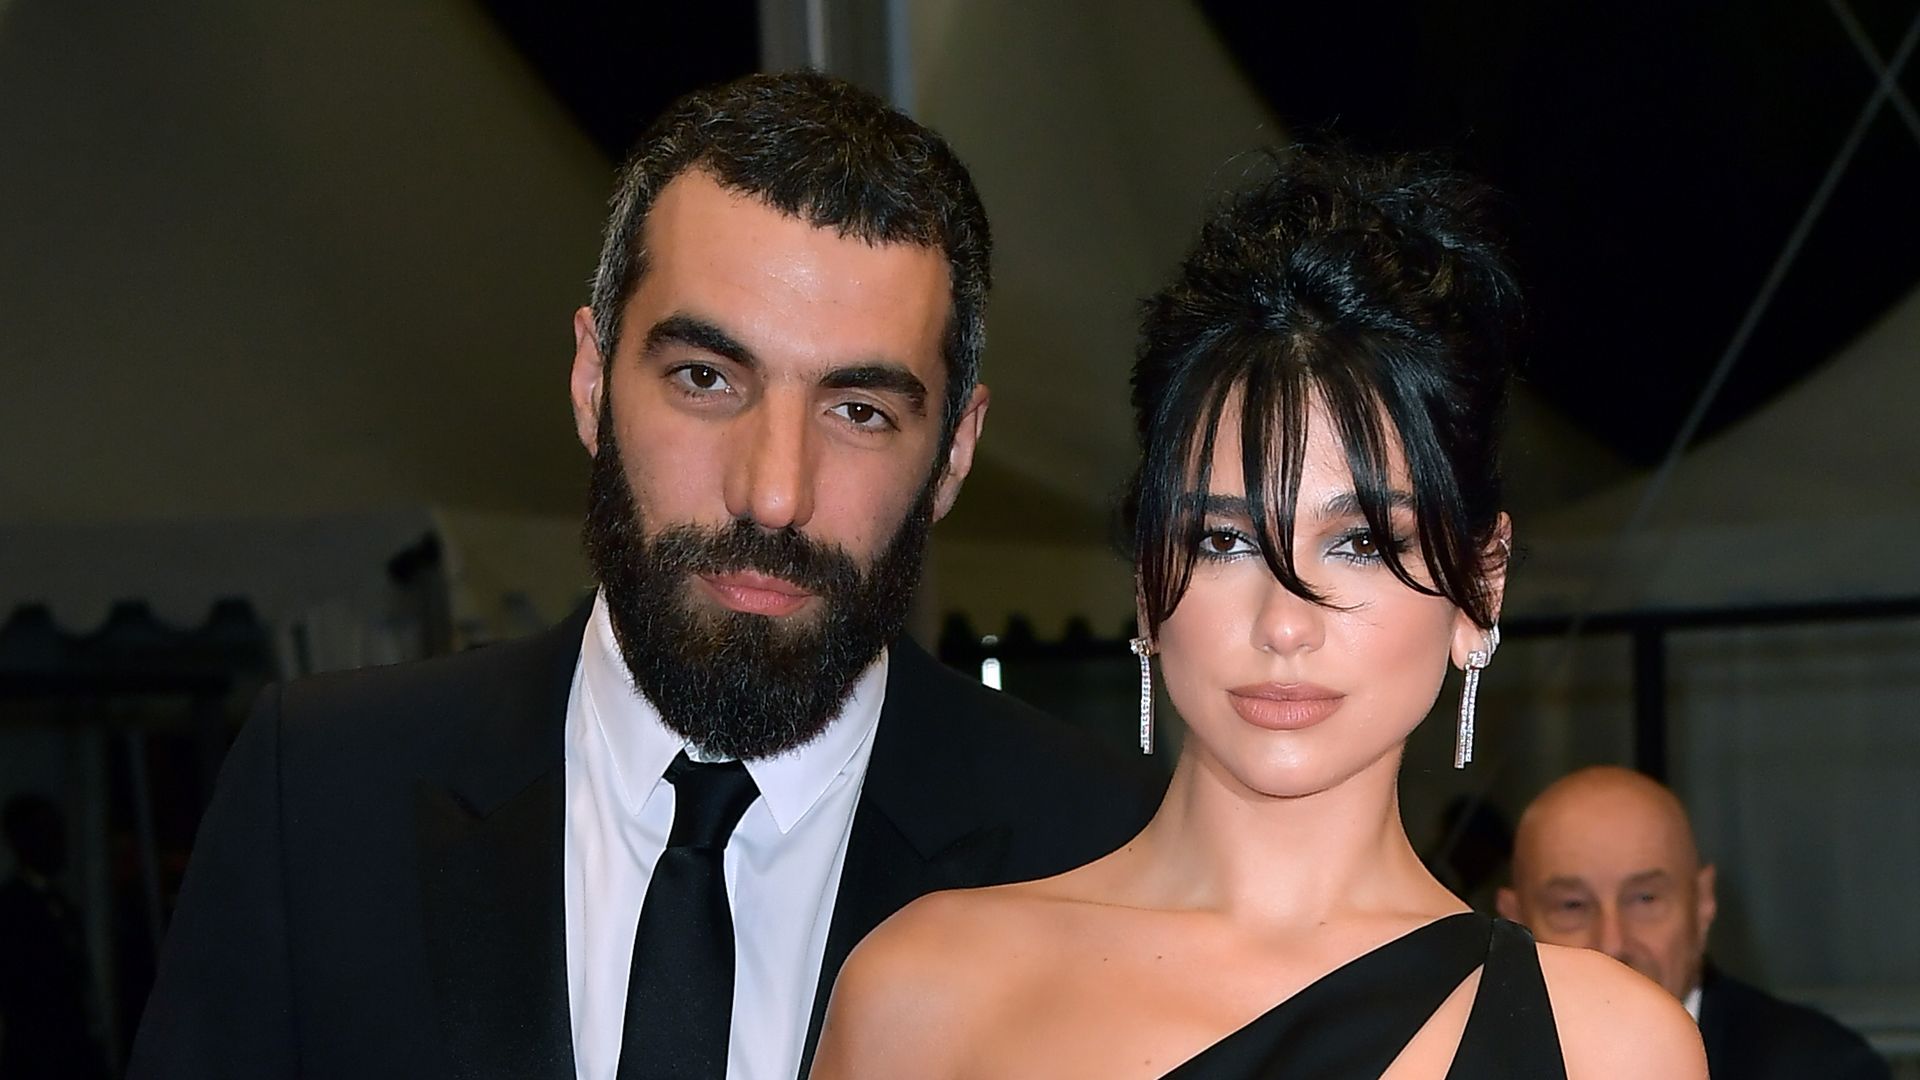 Dua Lipa makes red carpet debut with new beau Romain Gavras in sultry